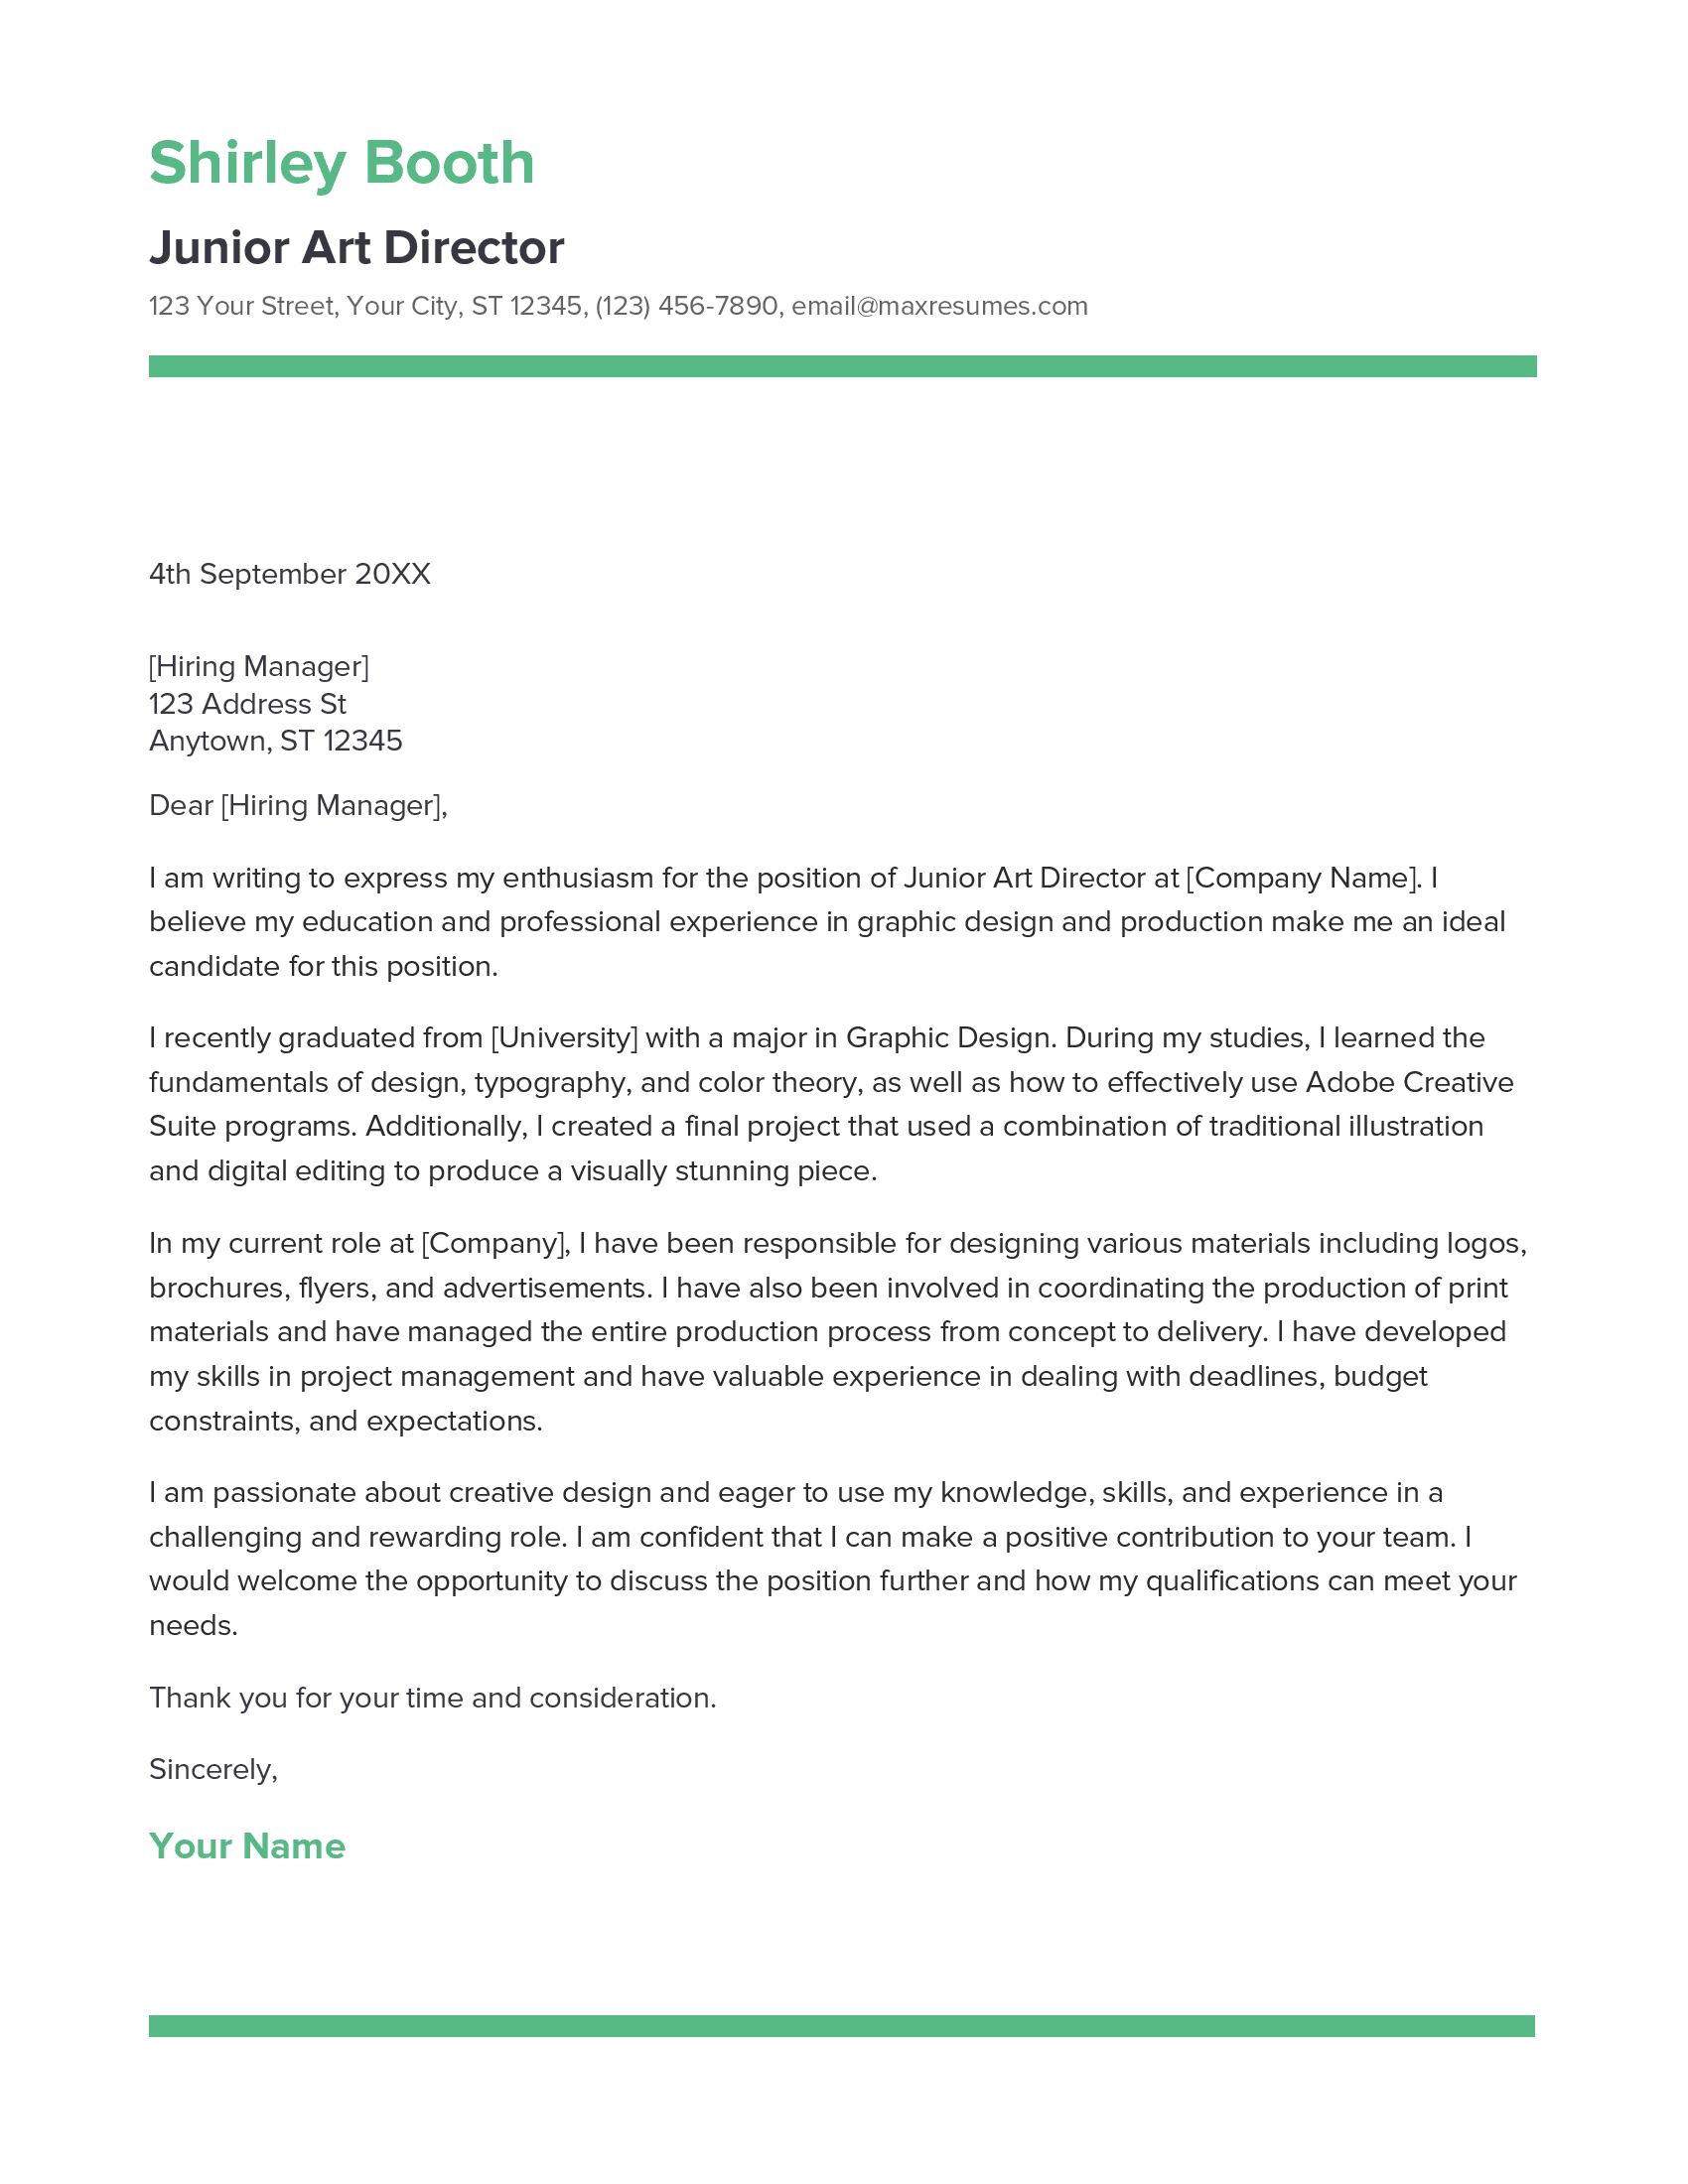 Junior Art Director Cover Letter Example